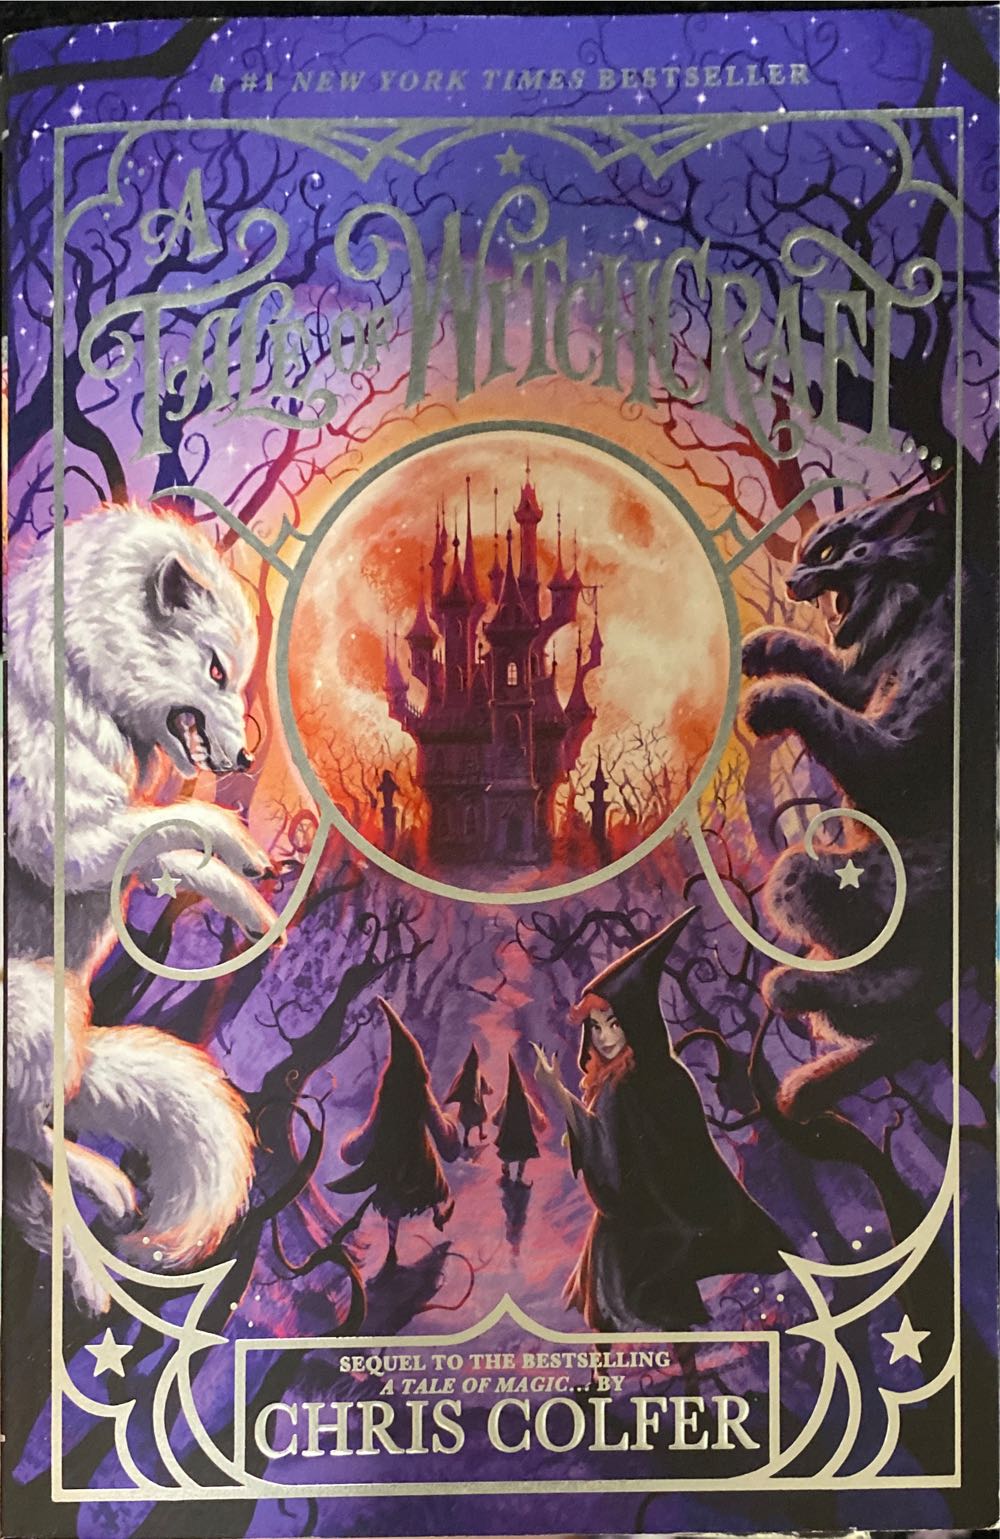 A Tale of Witchcraft (A Tale of Magic #2) - Chris Colfer (Little, Brown and Company - Paperback) book collectible [Barcode 9780316523547] - Main Image 1